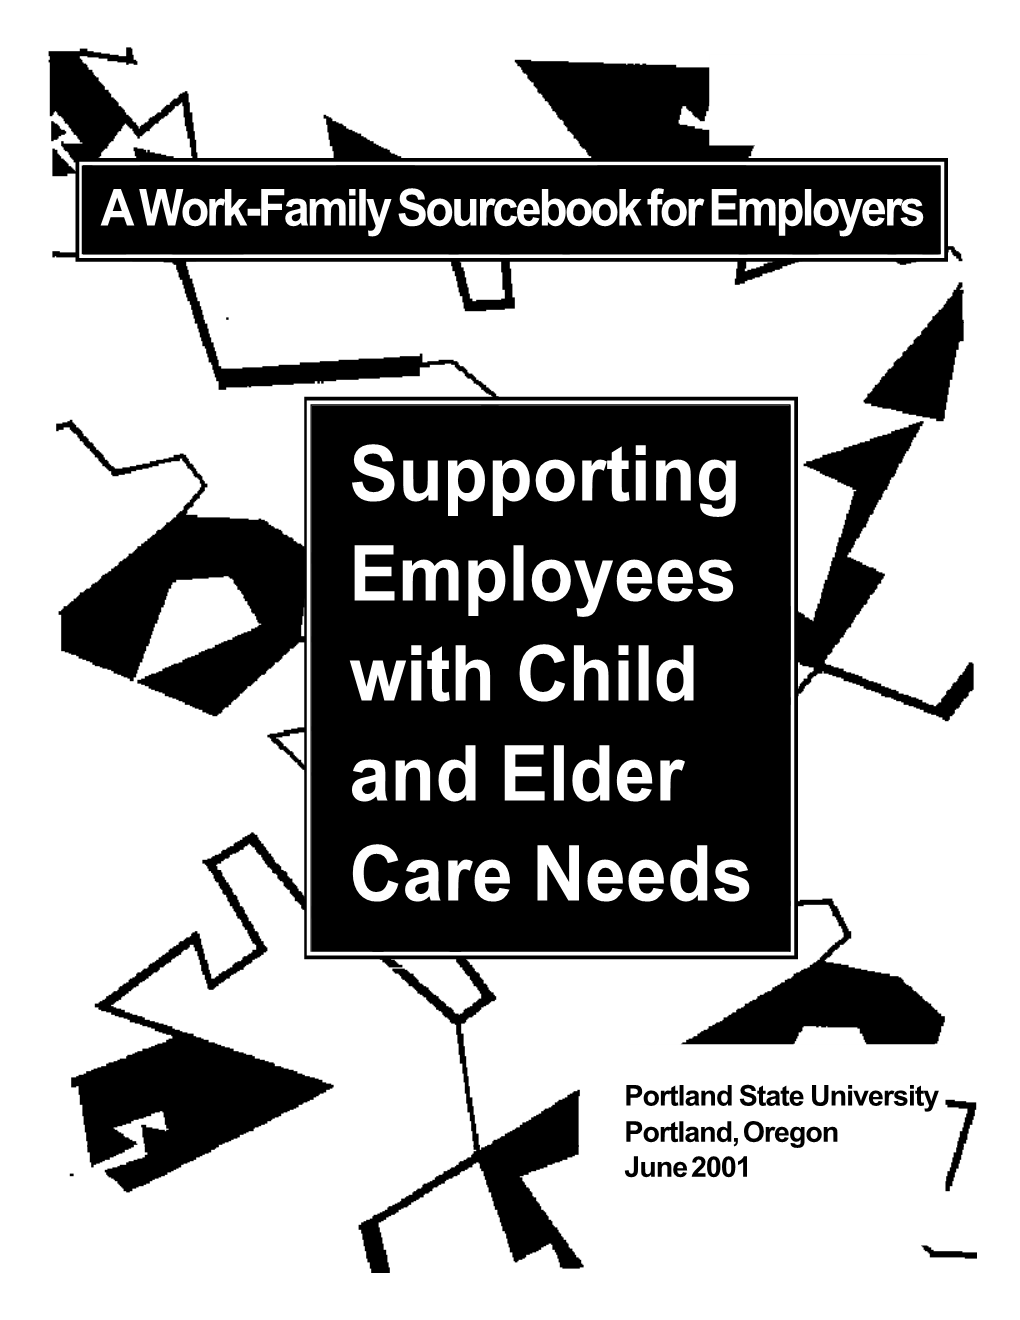 Supporting Employees with Child and Elder Care Needs